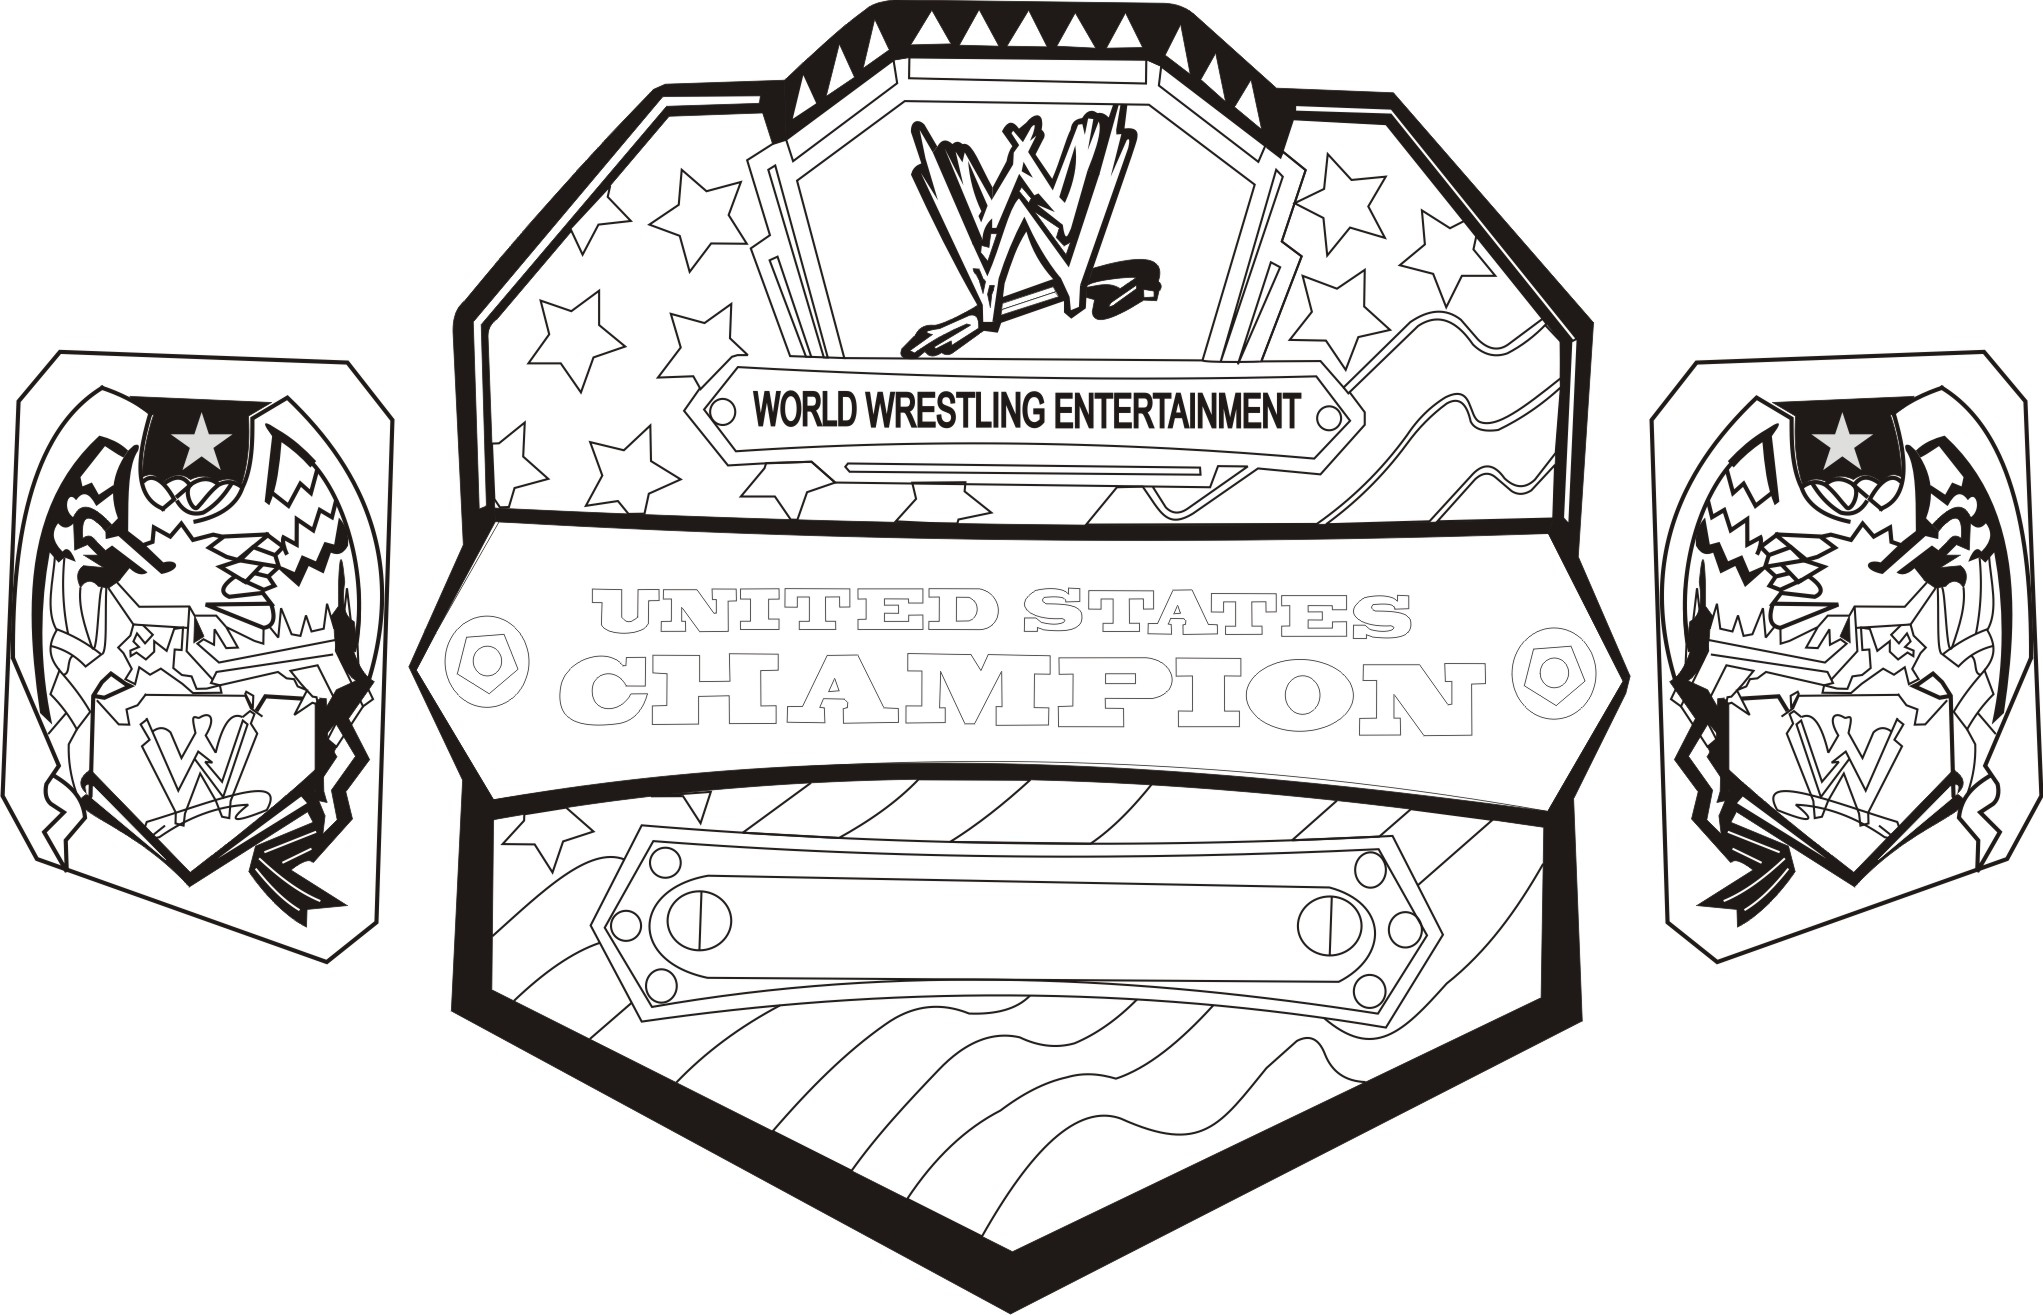 Wwe Wrestling Coloring Pages Cooloring Book Coloring Pages To Print Free Printableestling New